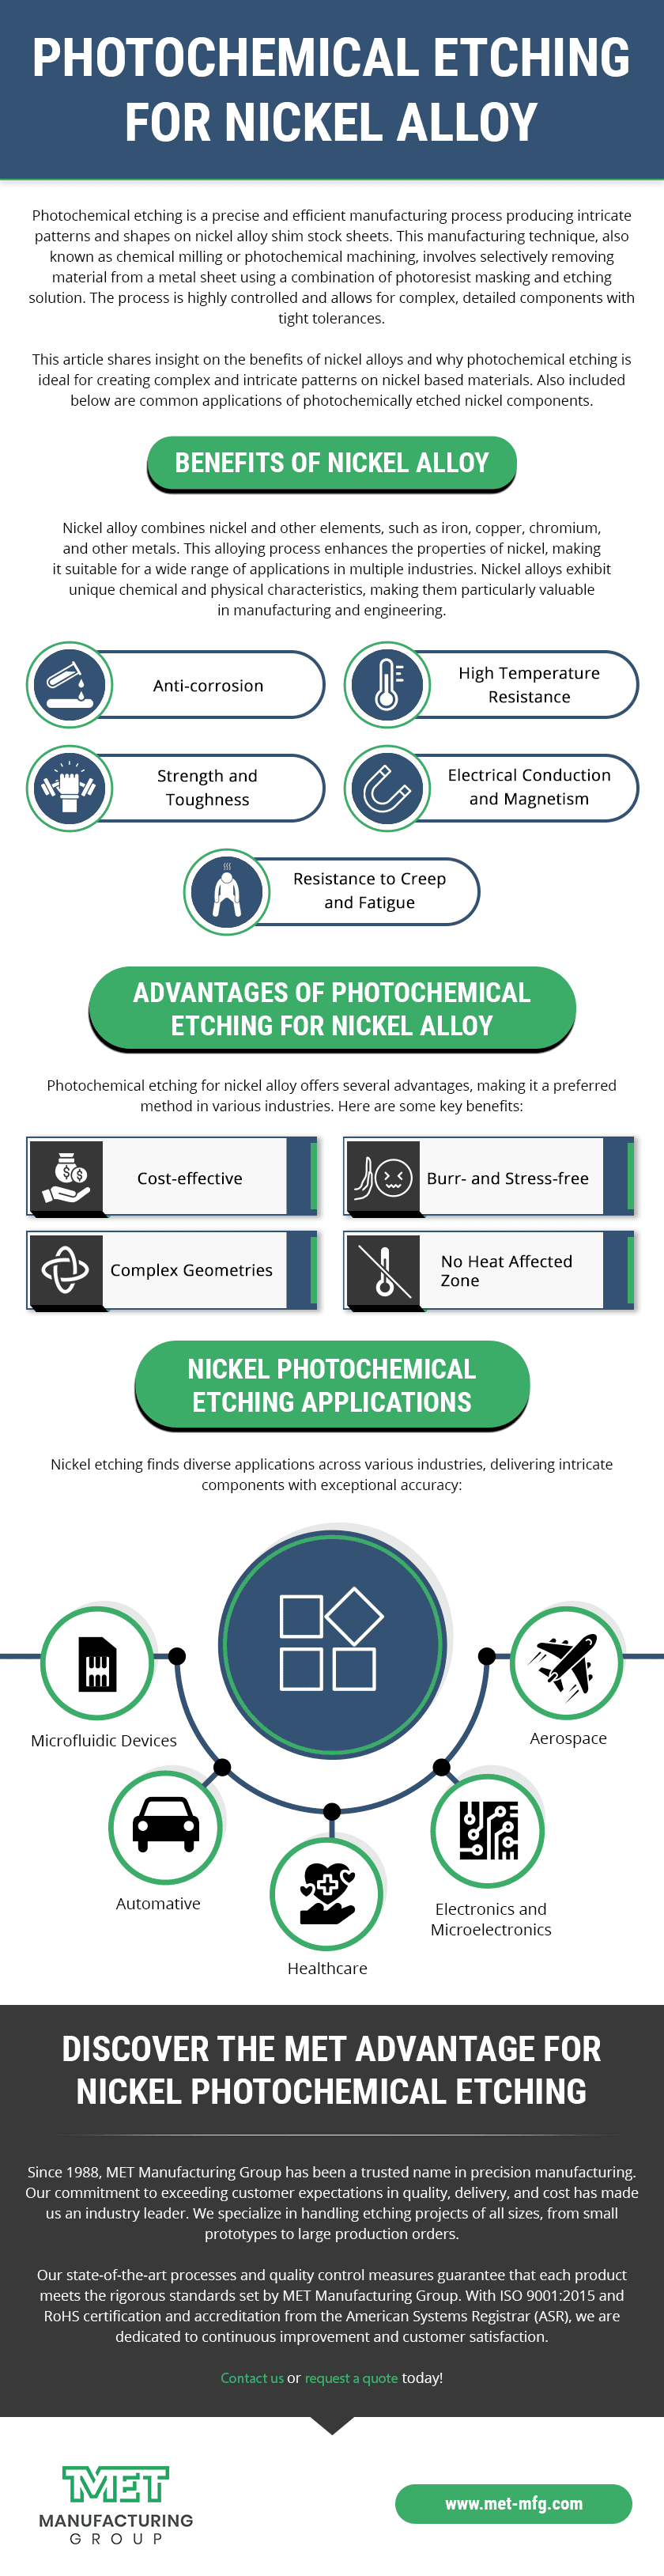 Photochemical Etching for Nickel Alloy